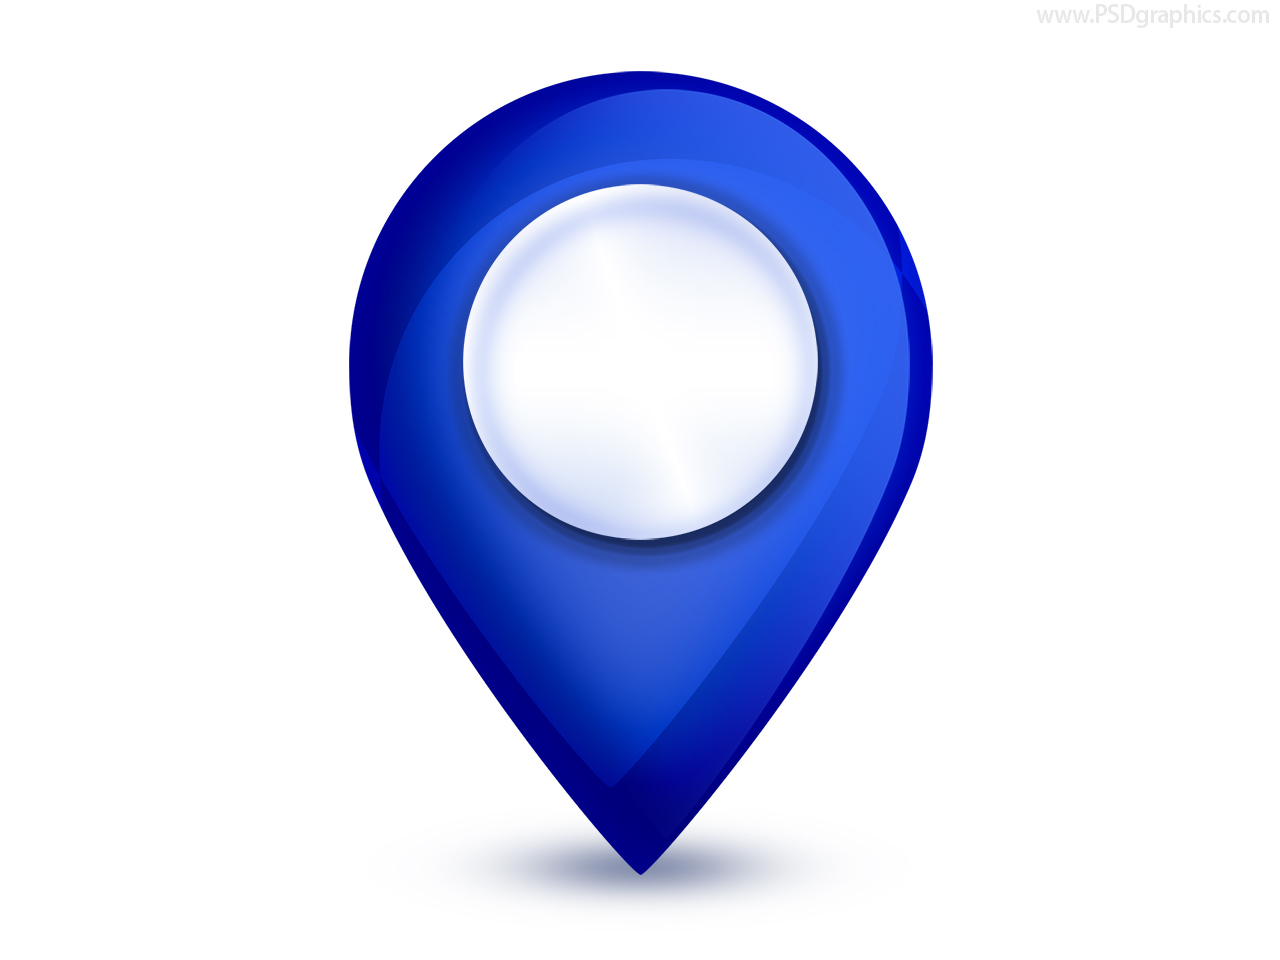 Map Pointer Icon